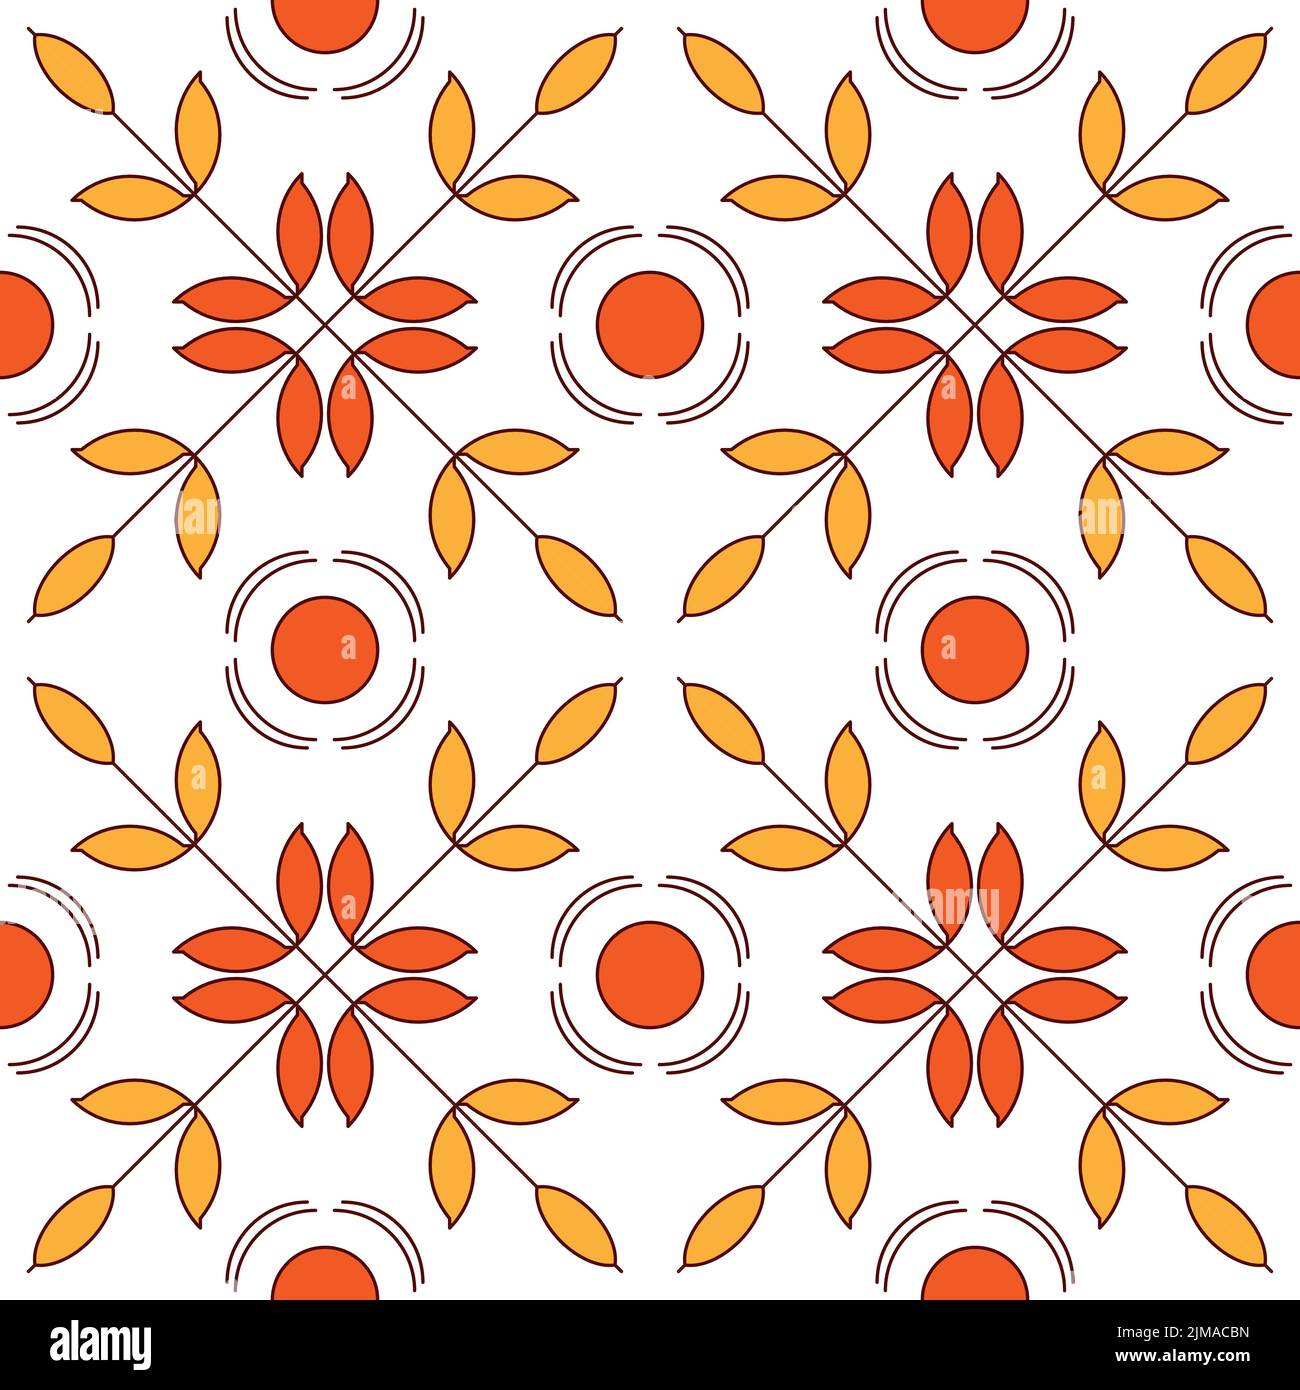 Seamless pattern of simple repeating shapes. Suitable for textiles, wrapping paper, scrapbooking. Vector. Stock Vector